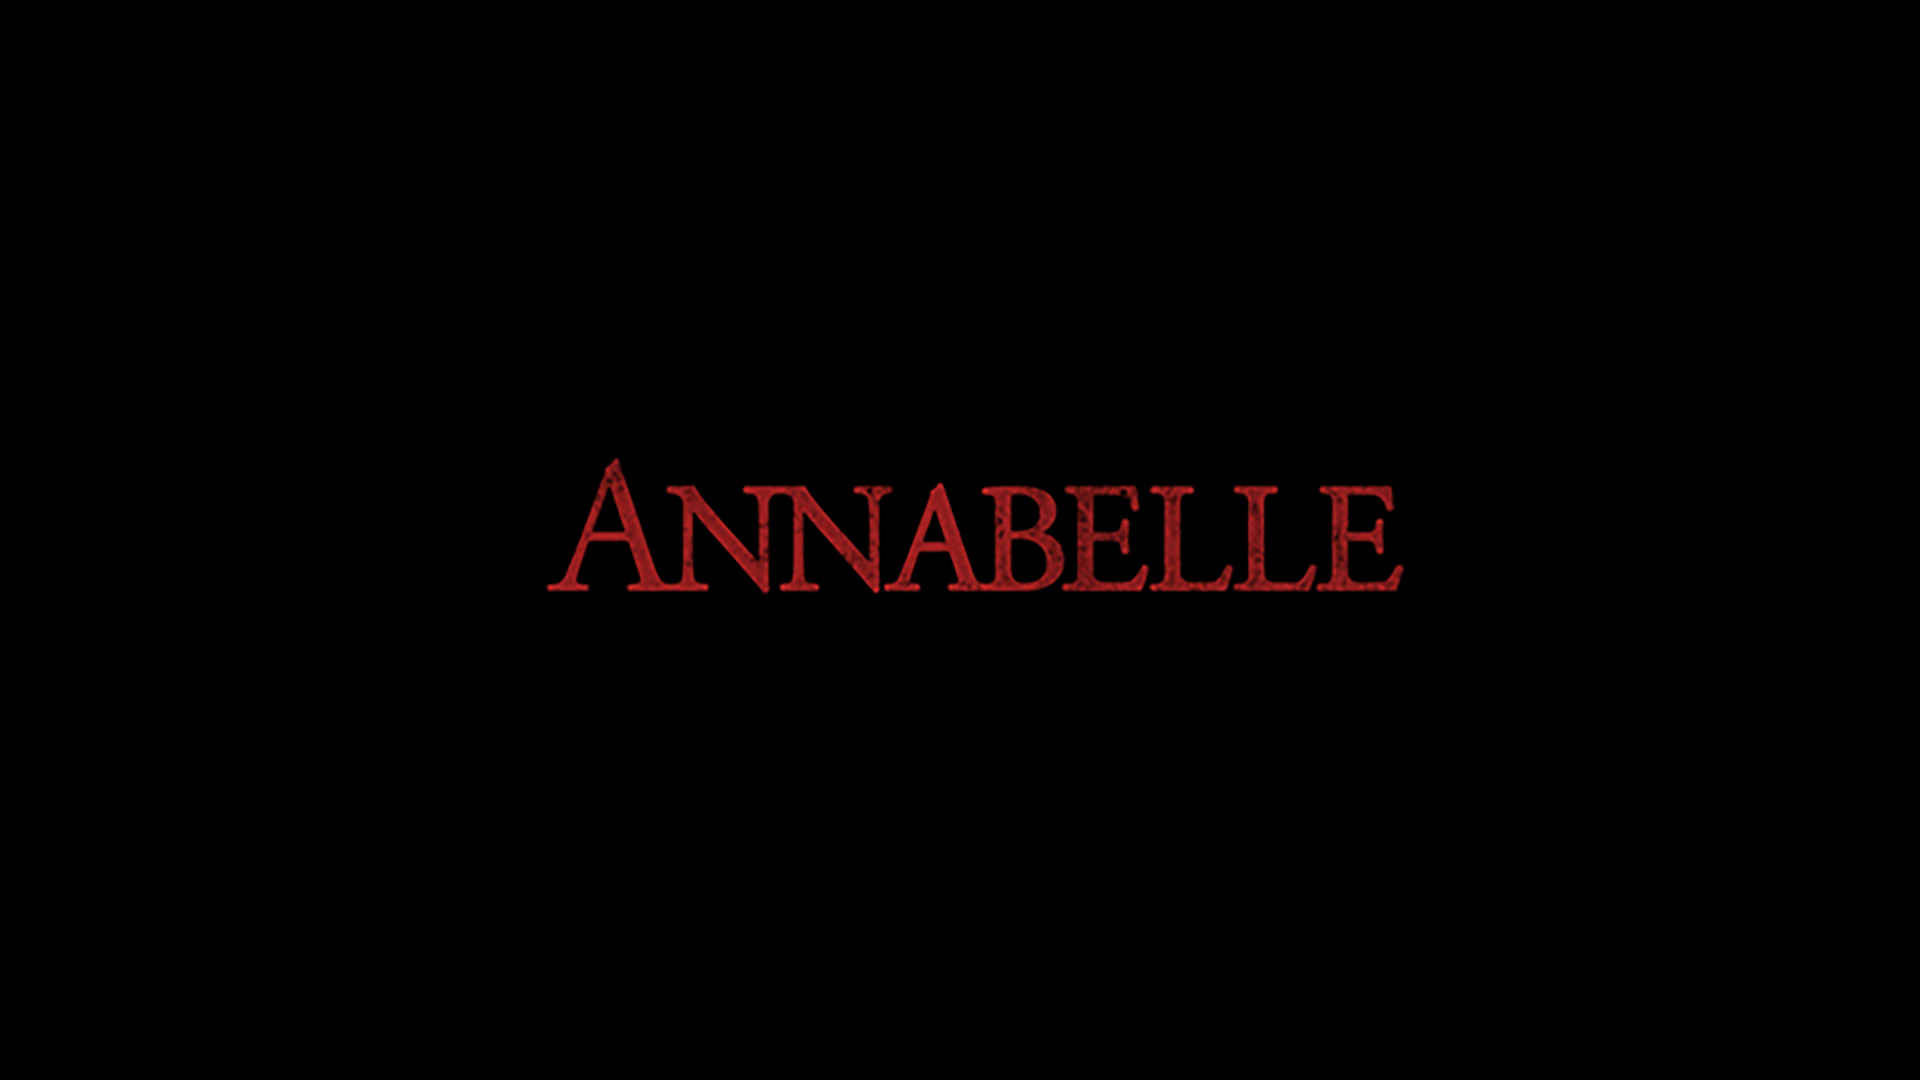 Annabelle Text In Black